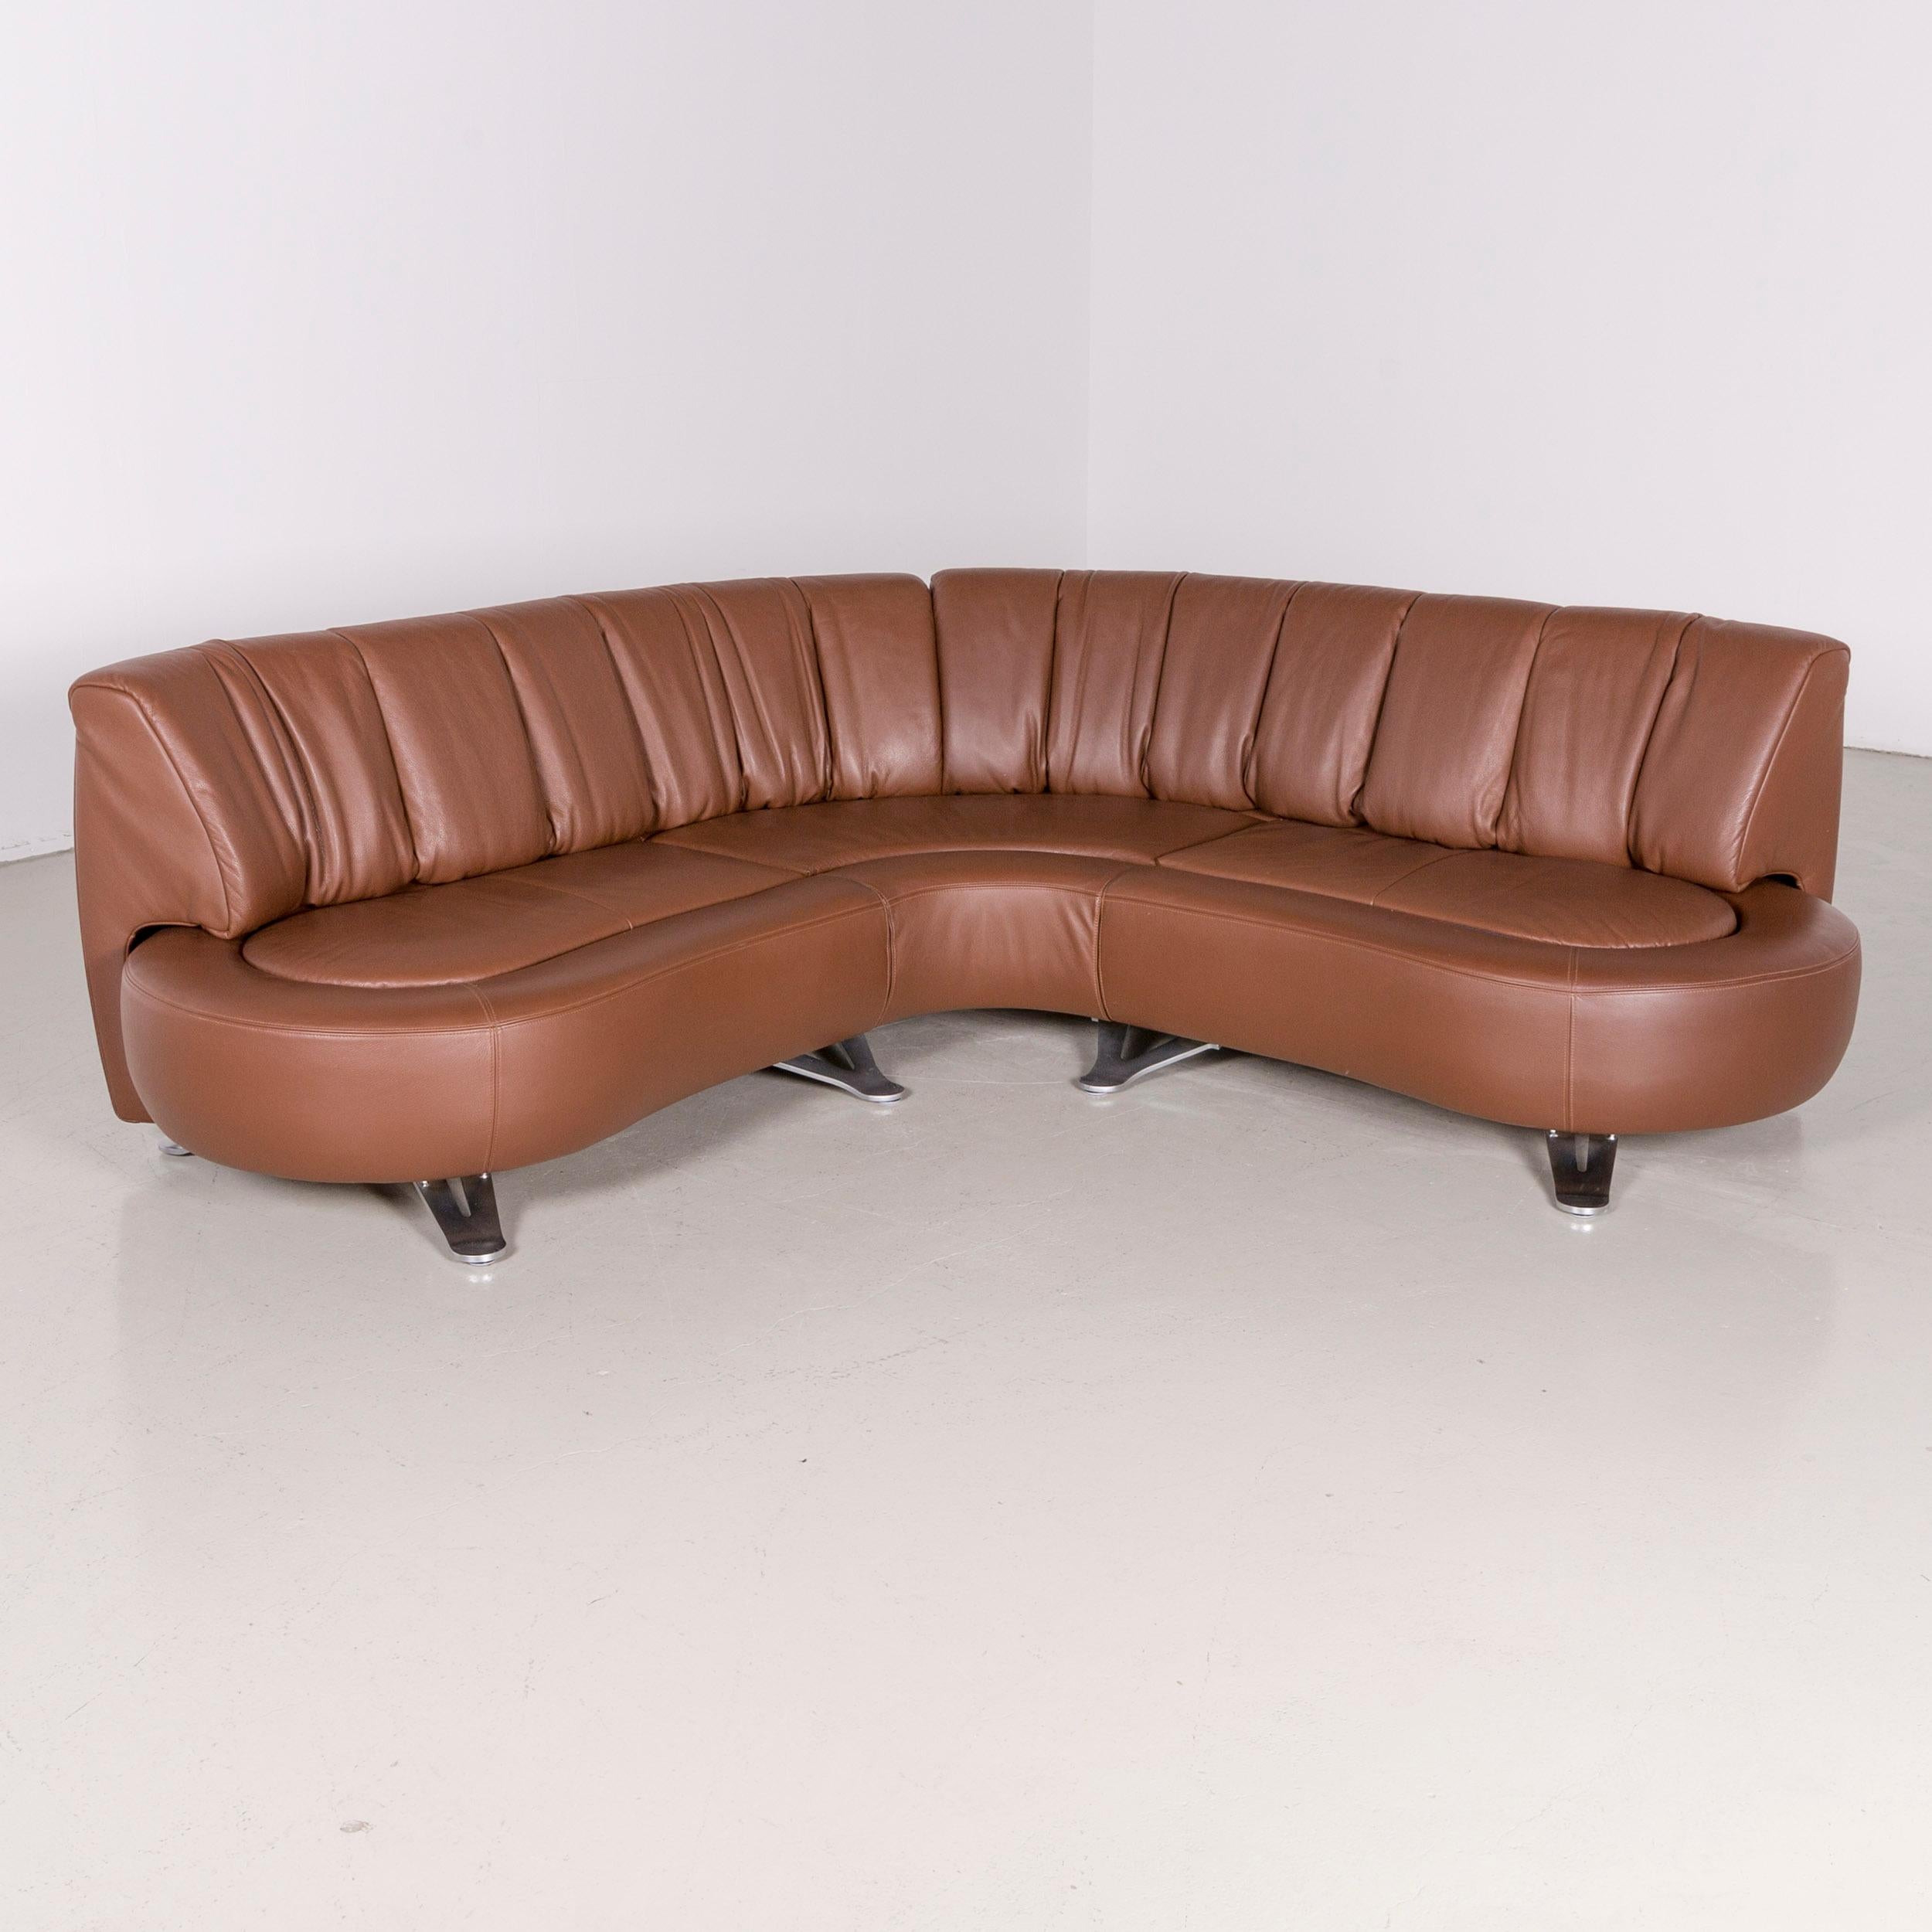 De Sede Ds 1064 designer leather sofa brown function couch made in Switzerland.